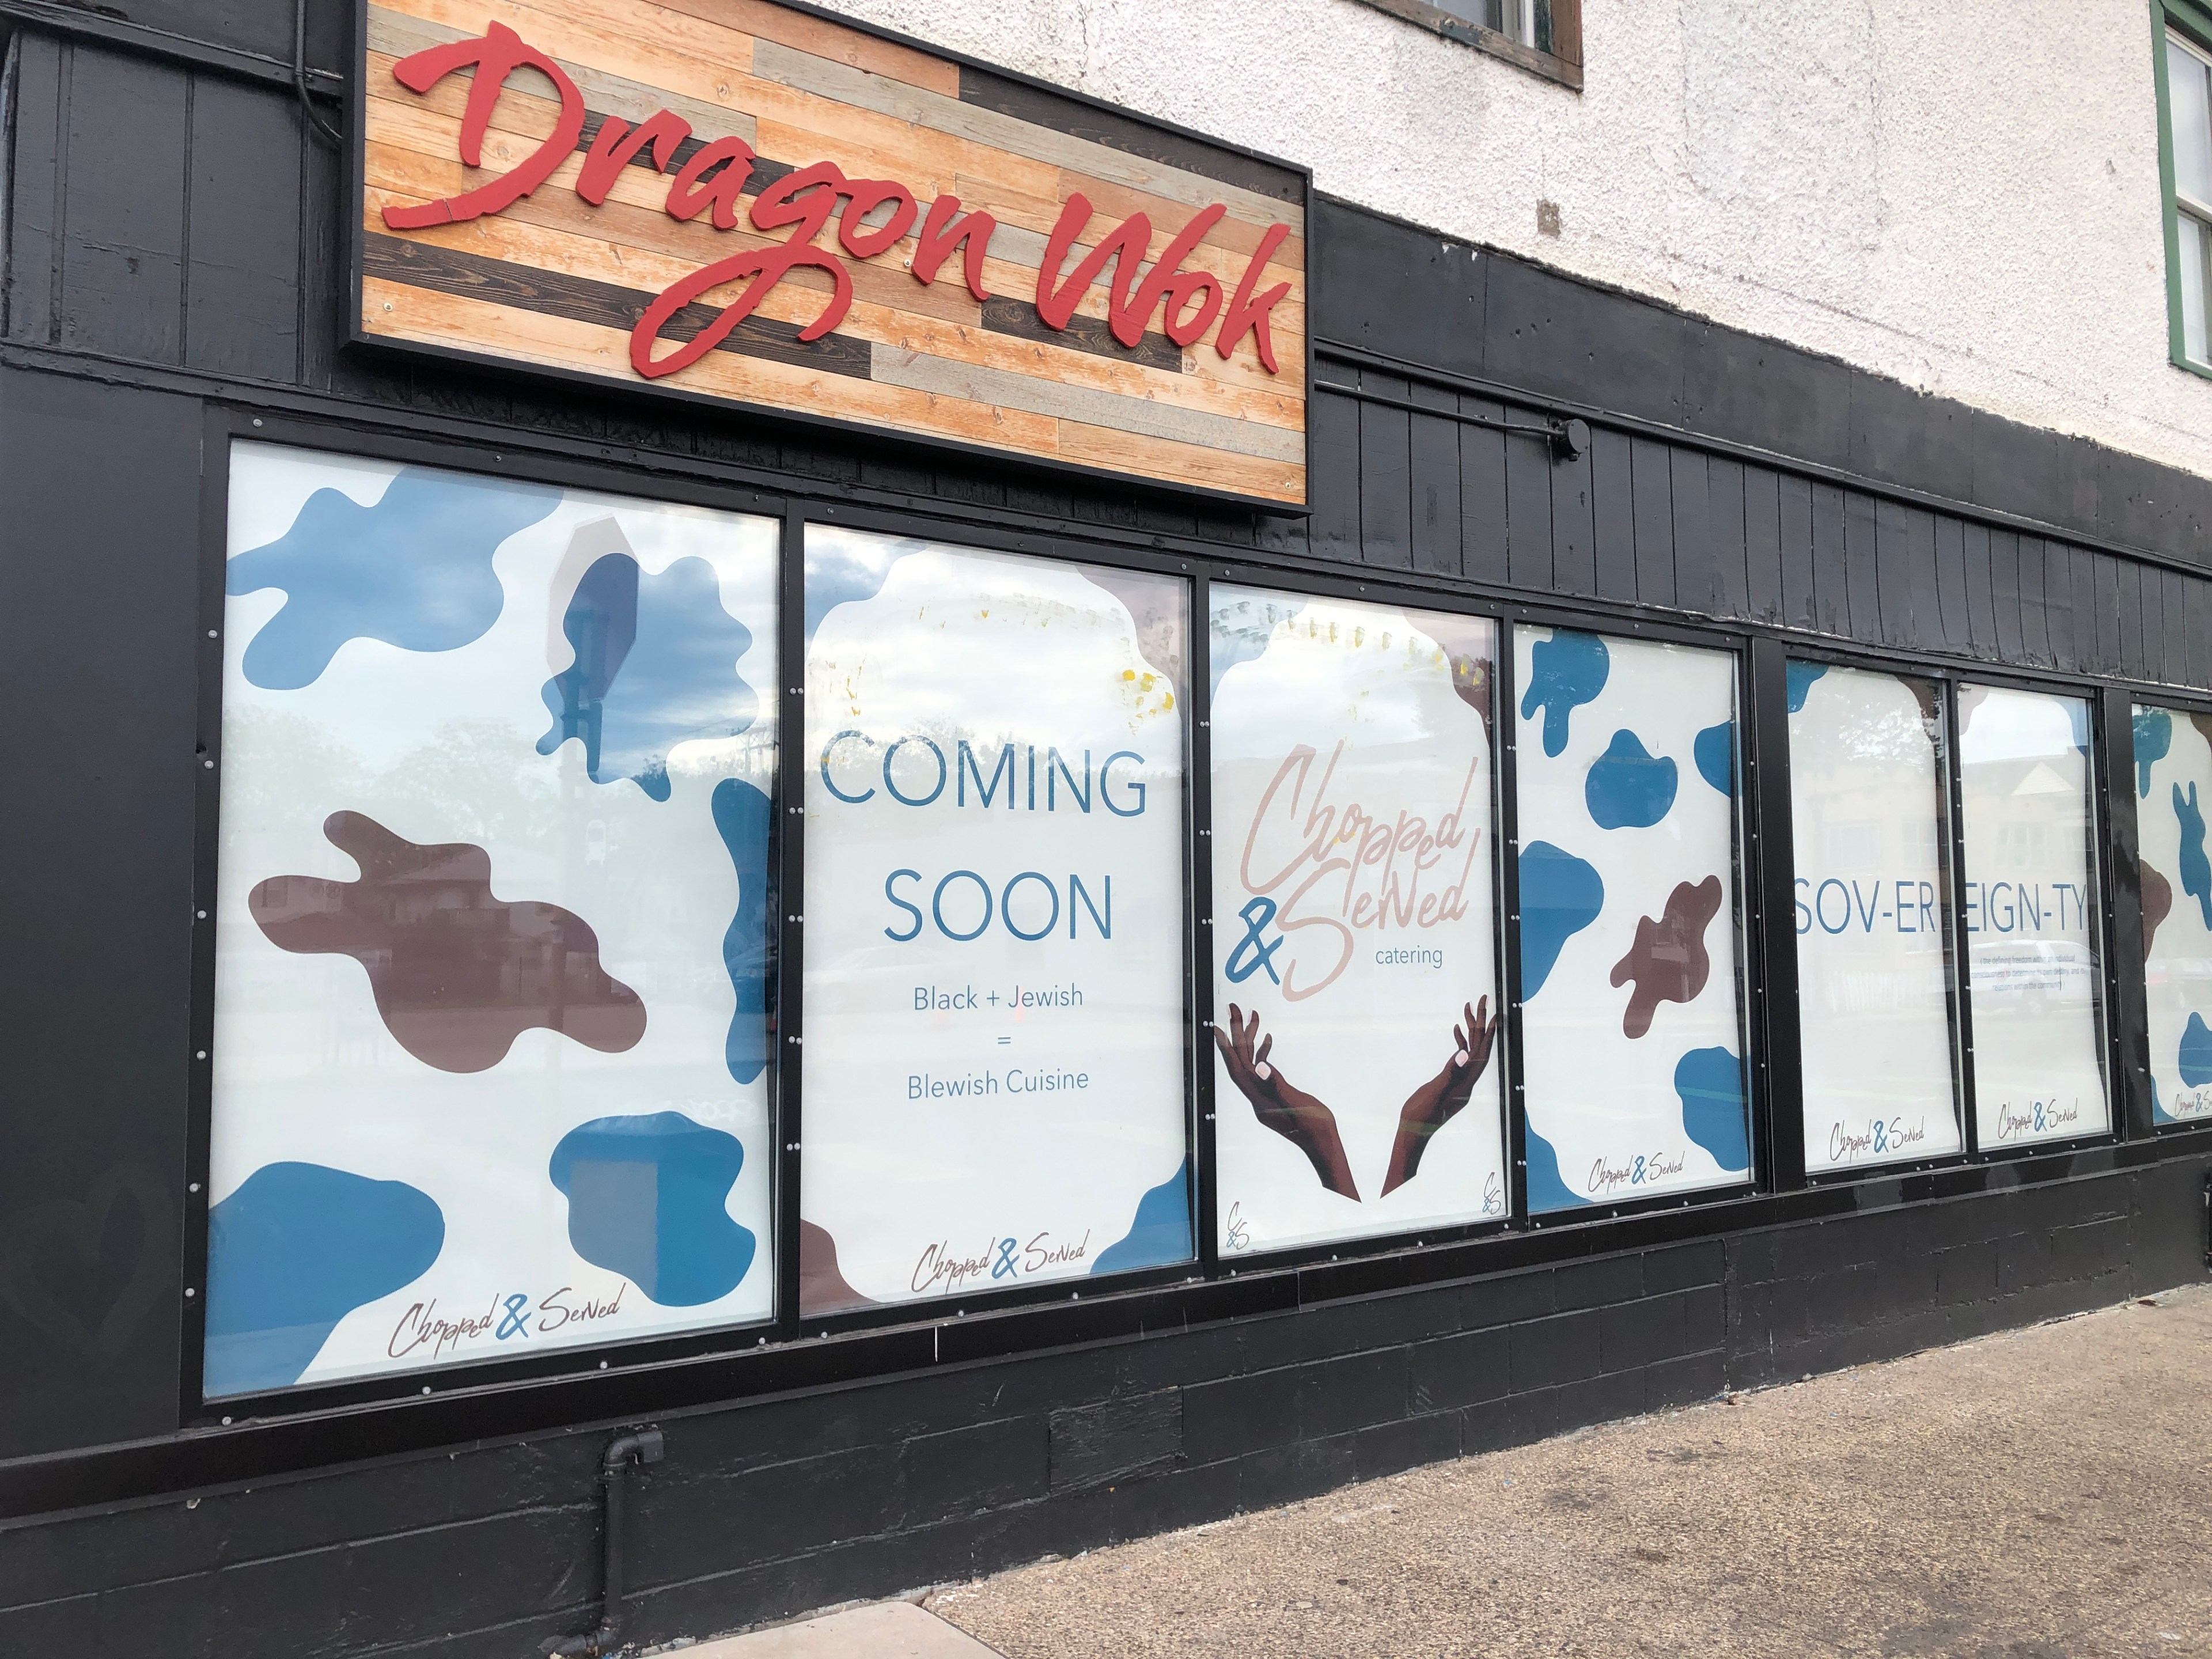 the exterior of the building at 805 E 38th St, Minneapolis, where the Dragon Wok sign still hangs, featuring Chopped & Served's "coming soon" signs in the windows